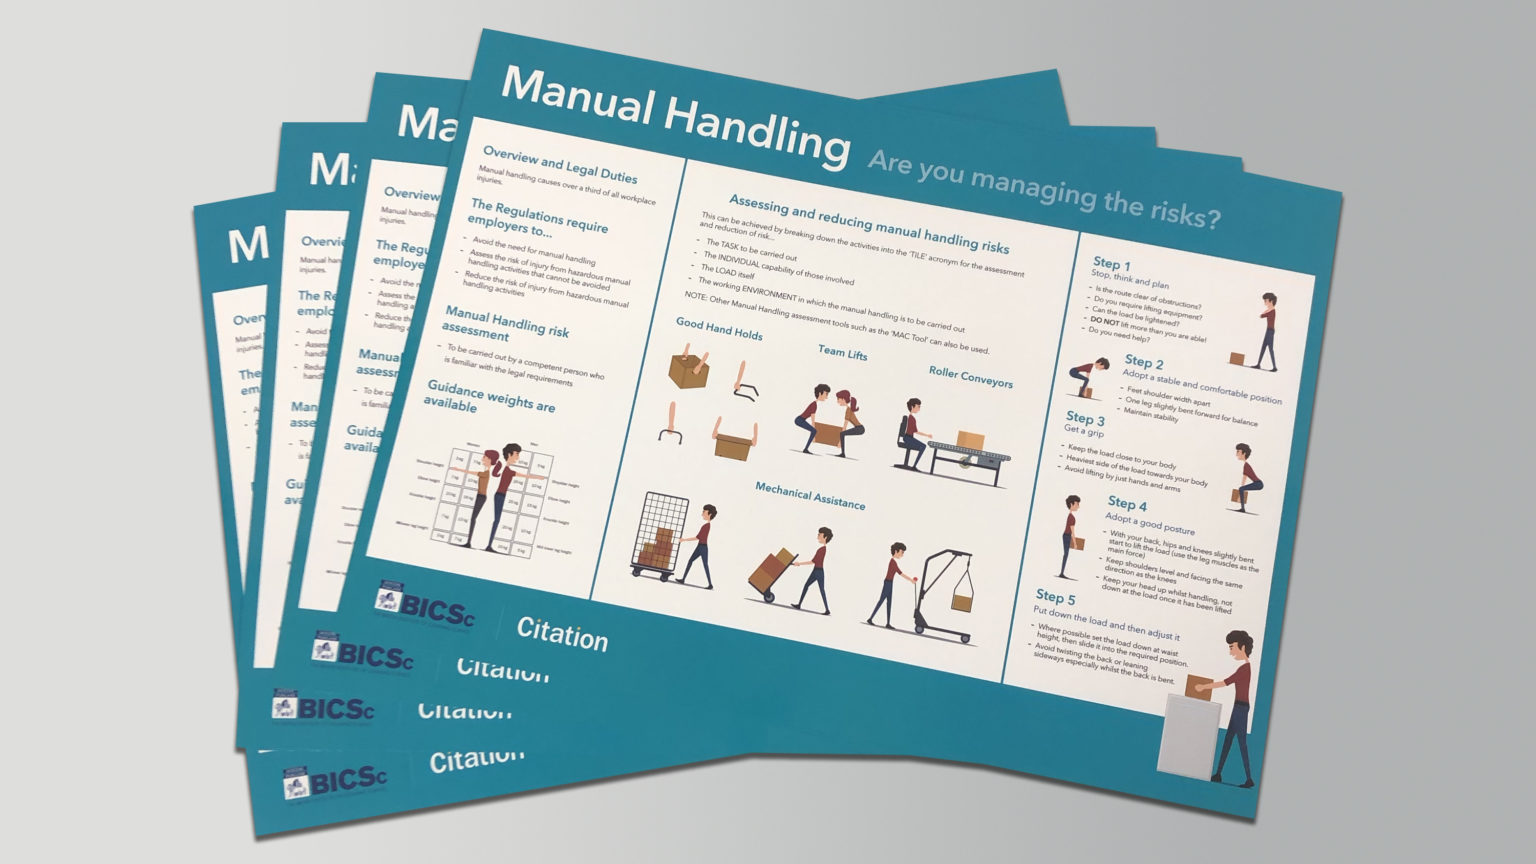 Handling перевод на русский. Manual handling. "Manual handling of loads"+"Spine". Manual handling poster. Health and Safety Law poster.